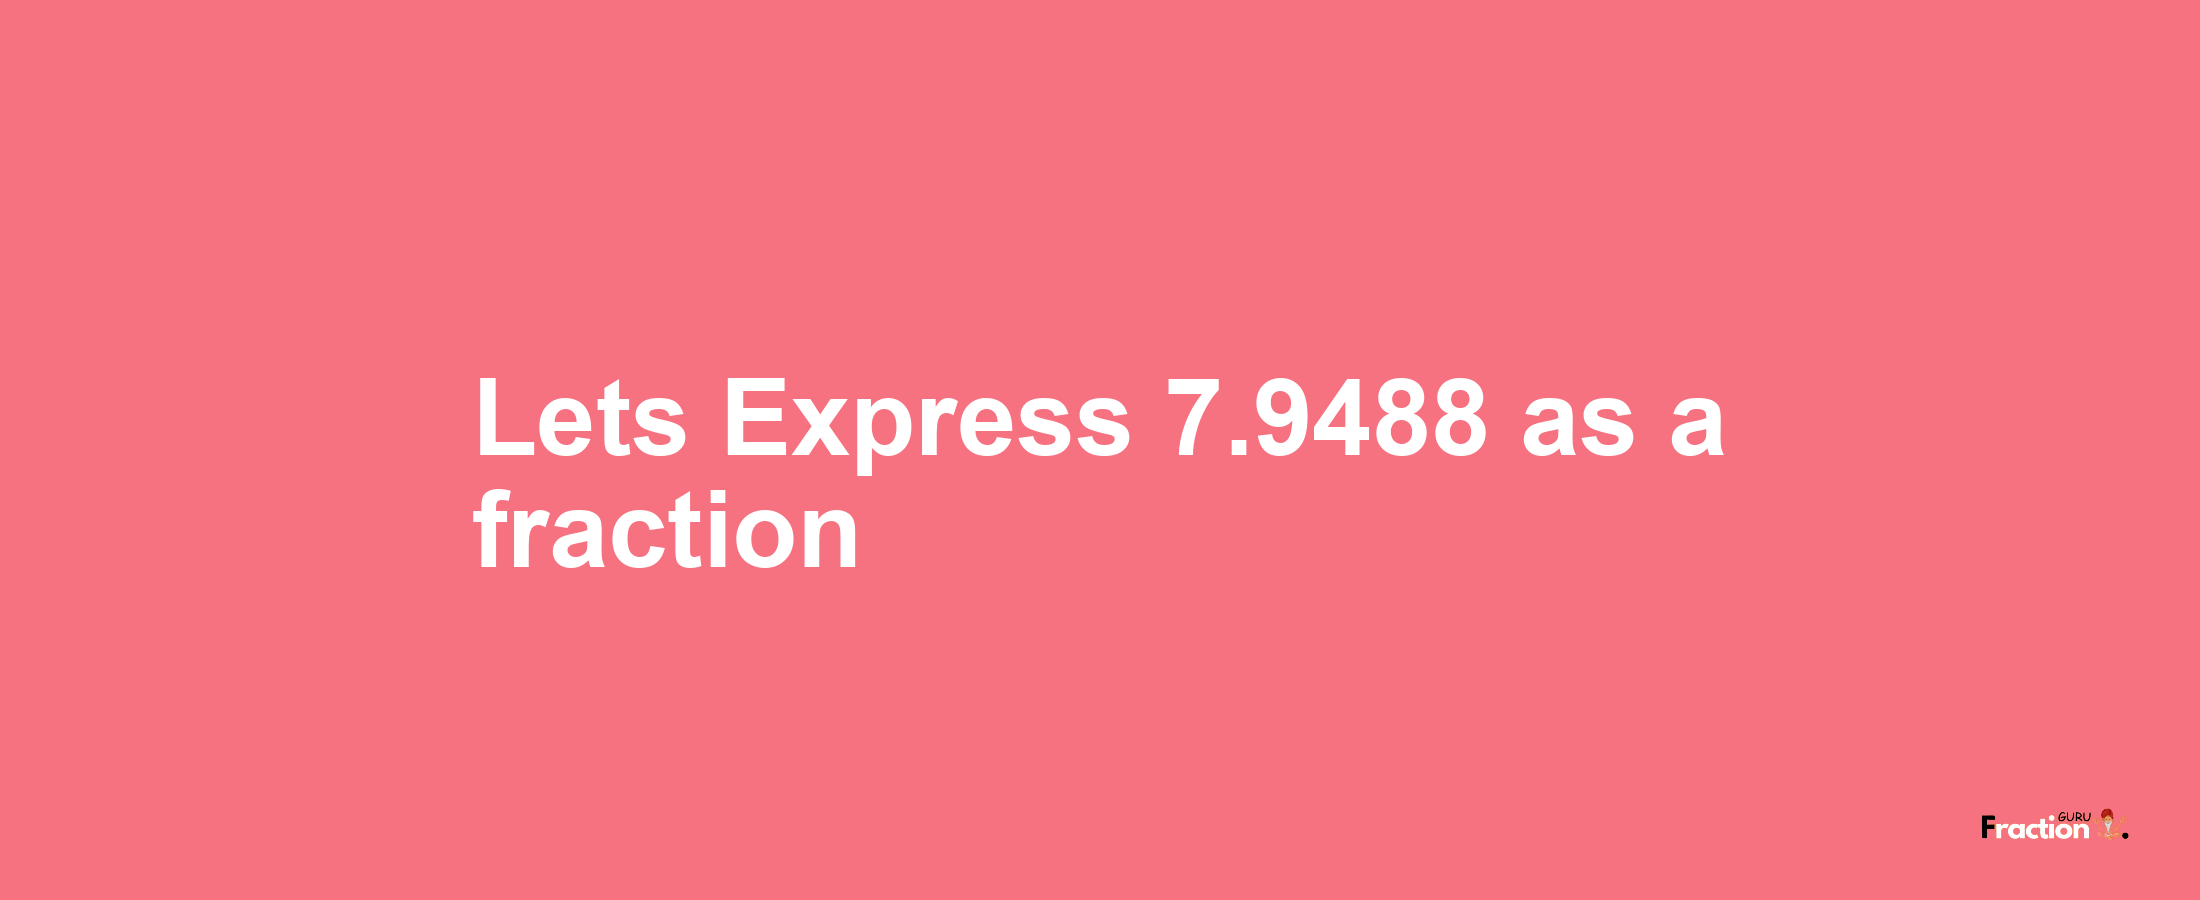 Lets Express 7.9488 as afraction